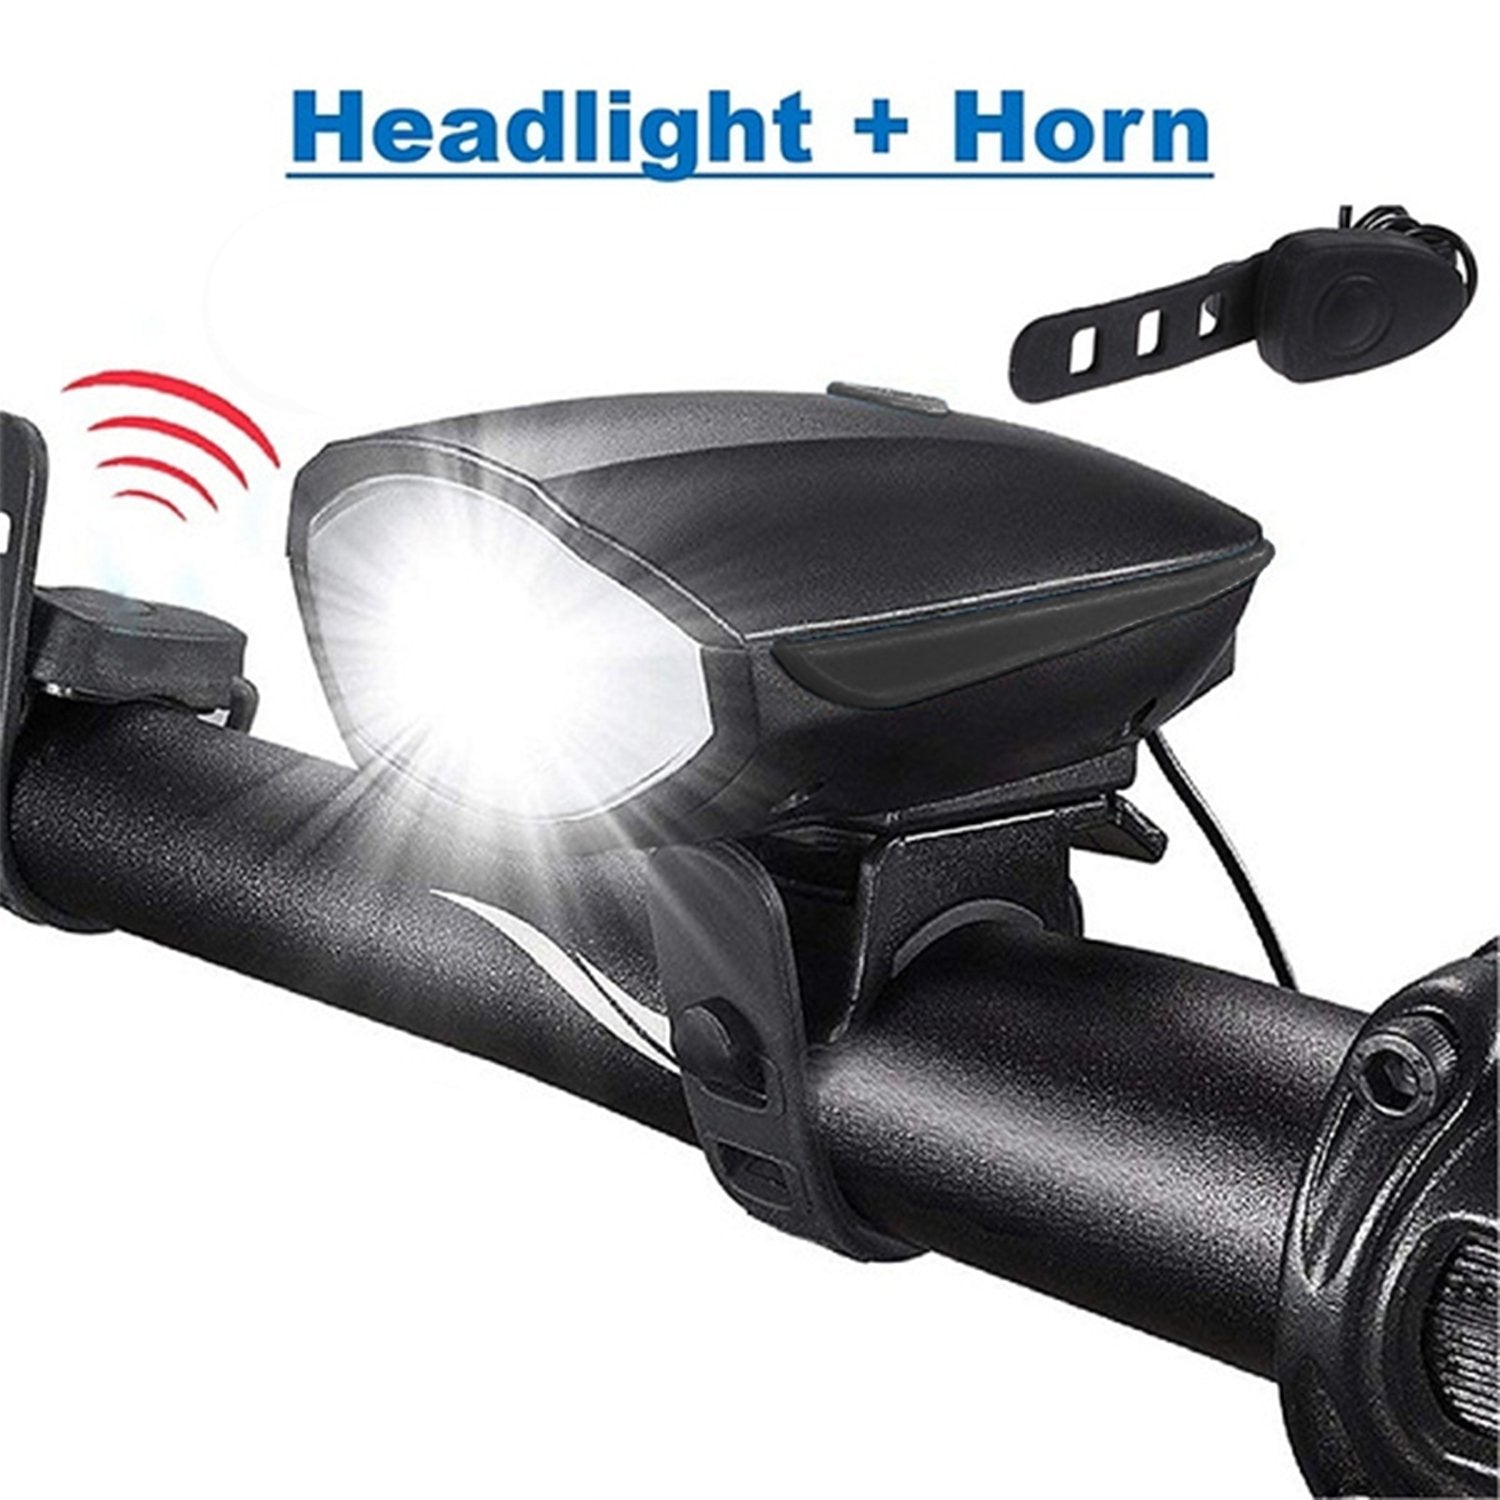 1718 Bicycle Horn with LED Light Work On Battery - SkyShopy